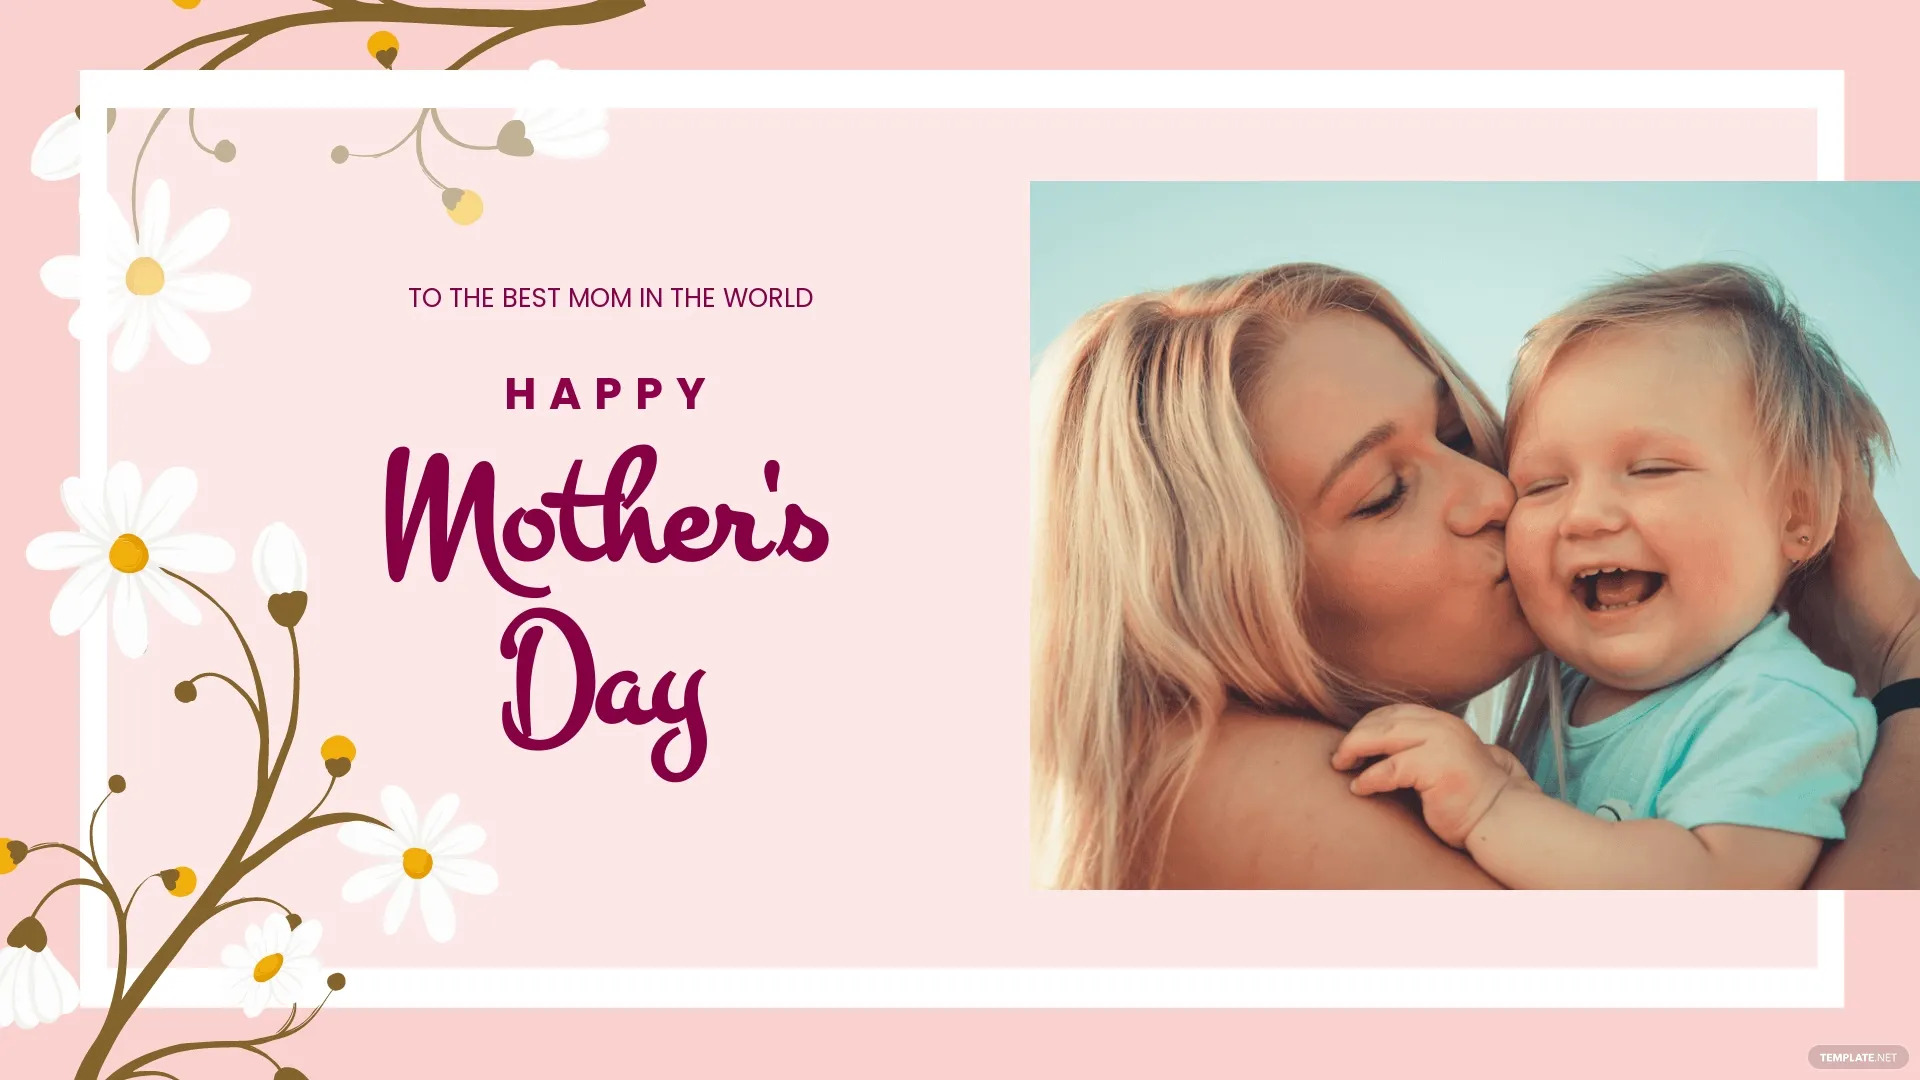 mothers day greeting images ideas and examples